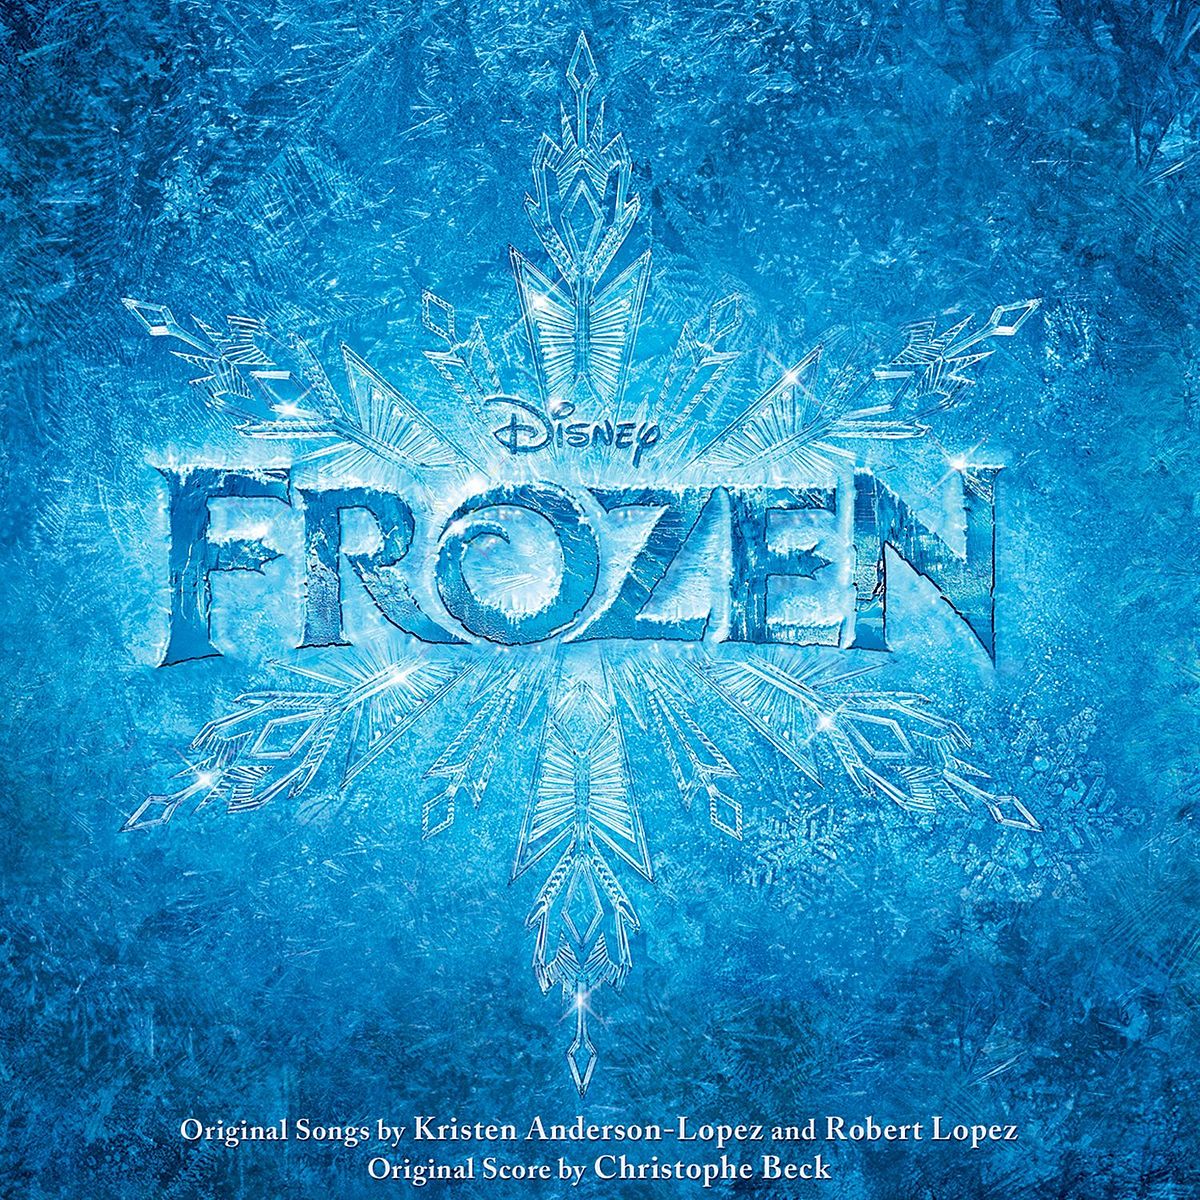 Kidsmusics Frozen Original Motion Picture Soundtrack Free Download Mp3 320kbps Flac Kids Music - download frozen limbs in roblox captive mp3 streaming frozen